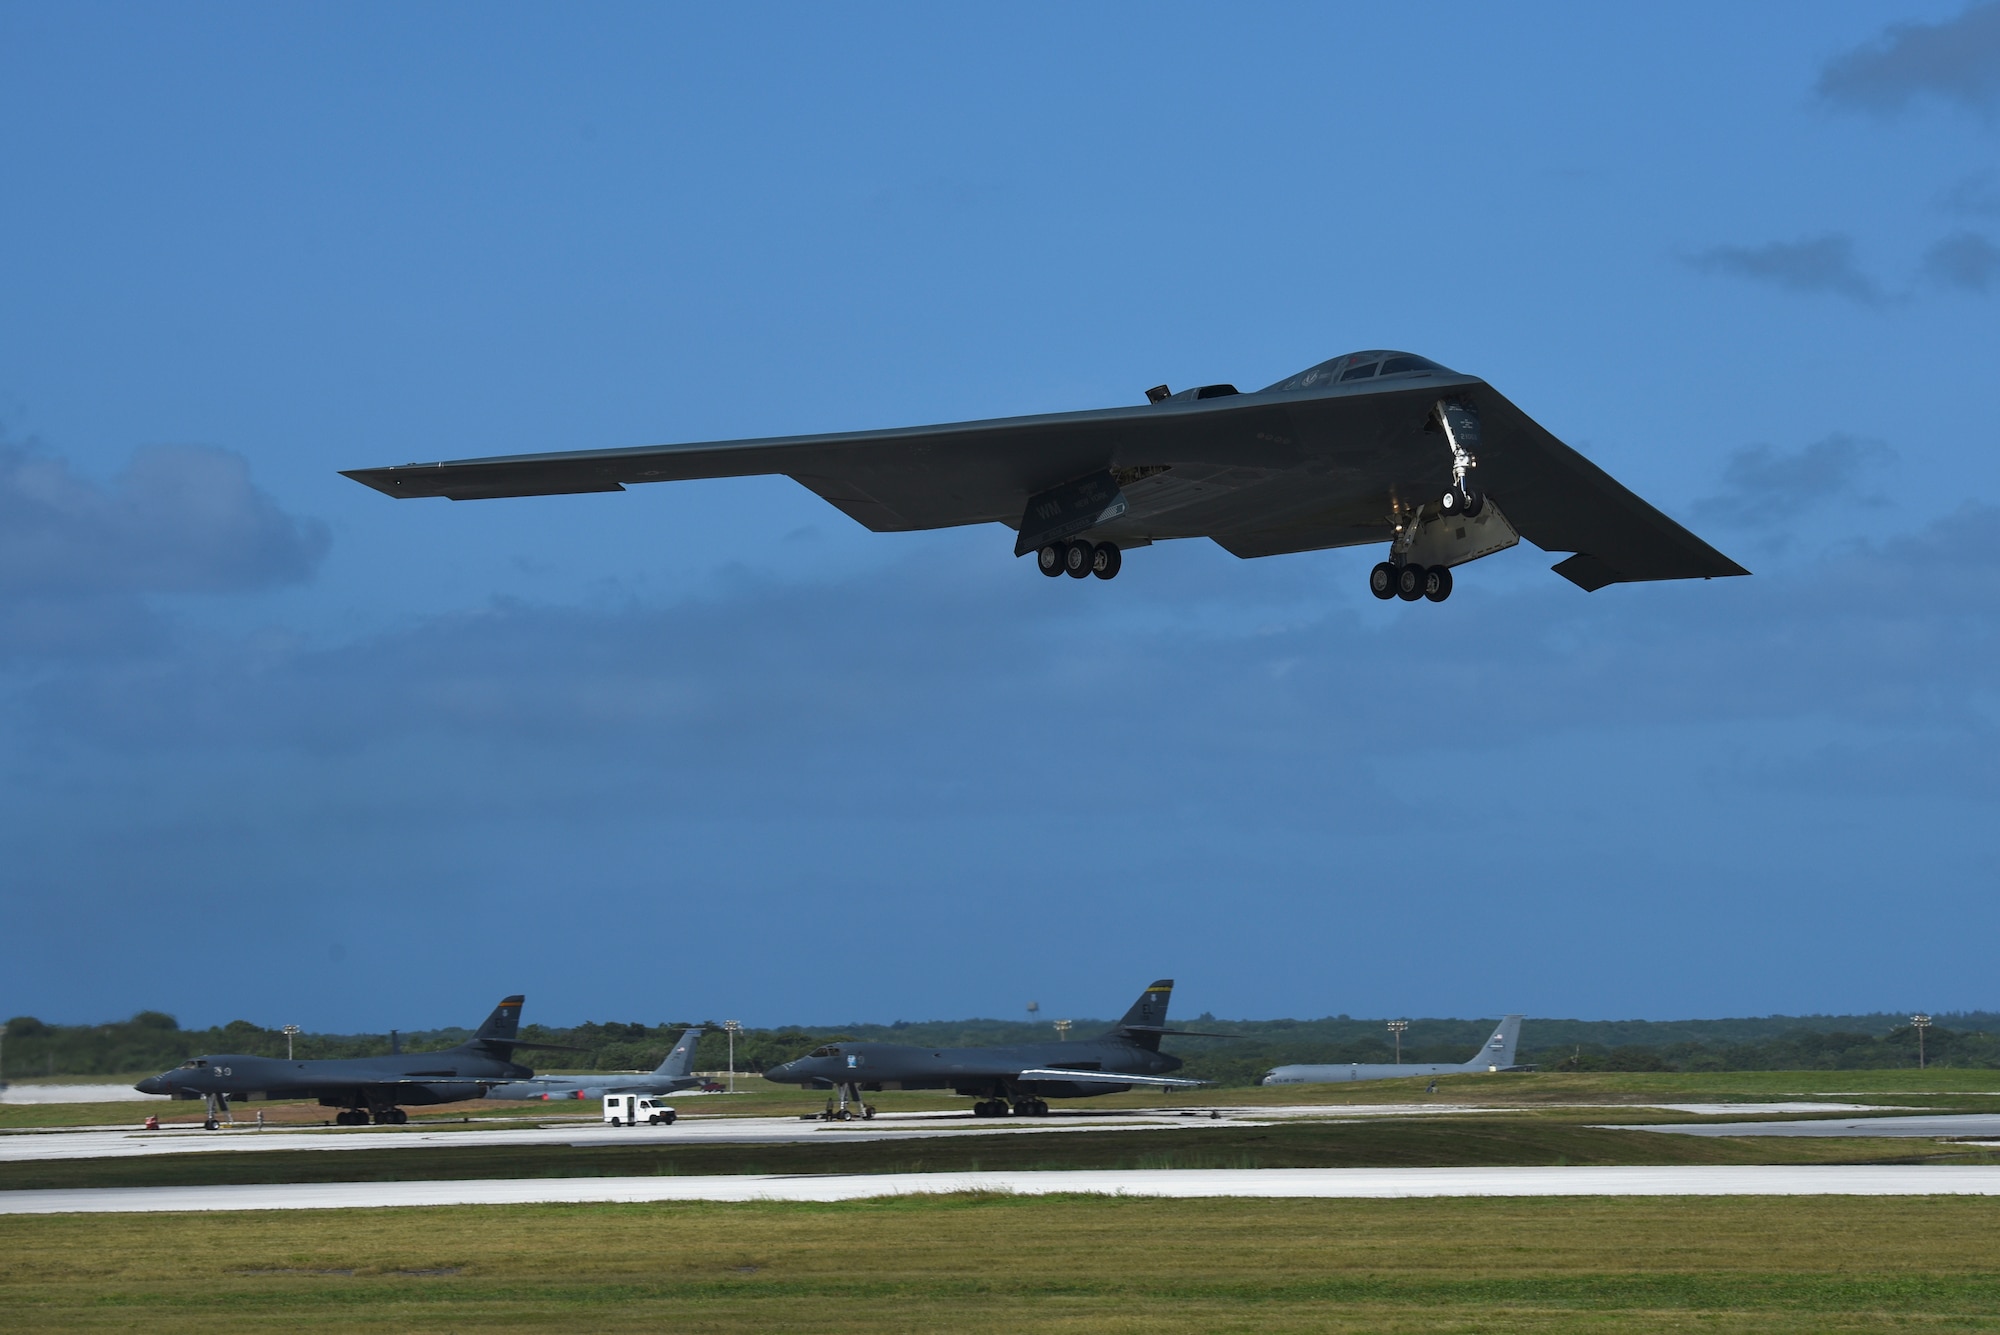 A U.S. Air Force B-2 Spirit bomber takes off form Andersen Air Force Base Jan. 11, 2018. (Air Force photo by Airman 1st Class Gerald Willis) .